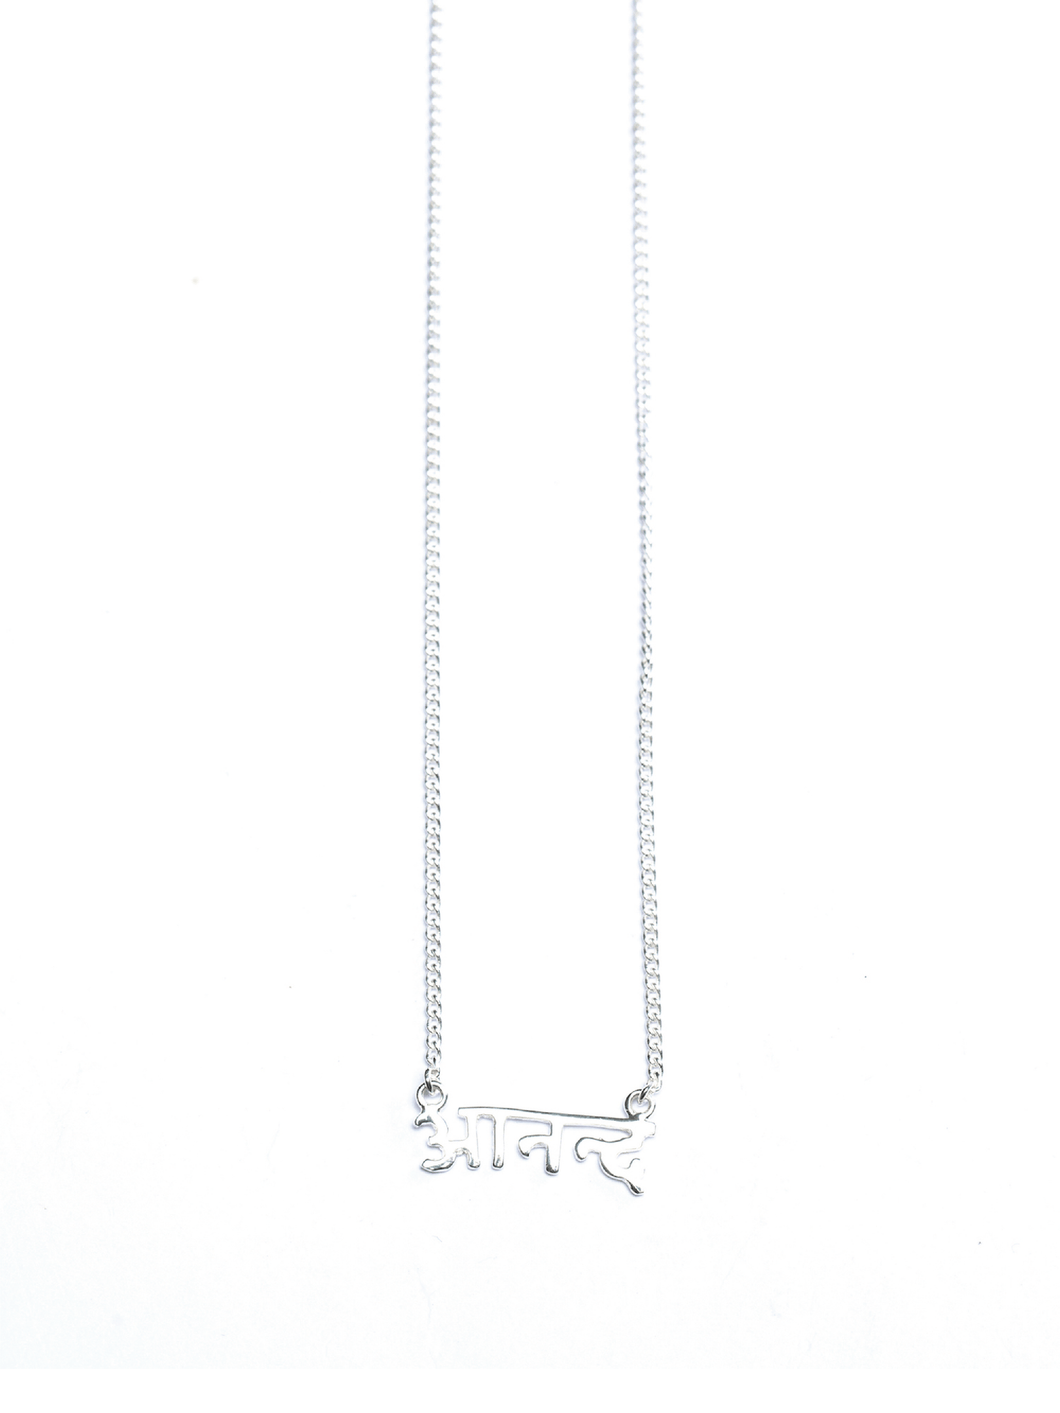 Happiness – Sanskrit Necklace (Silver)